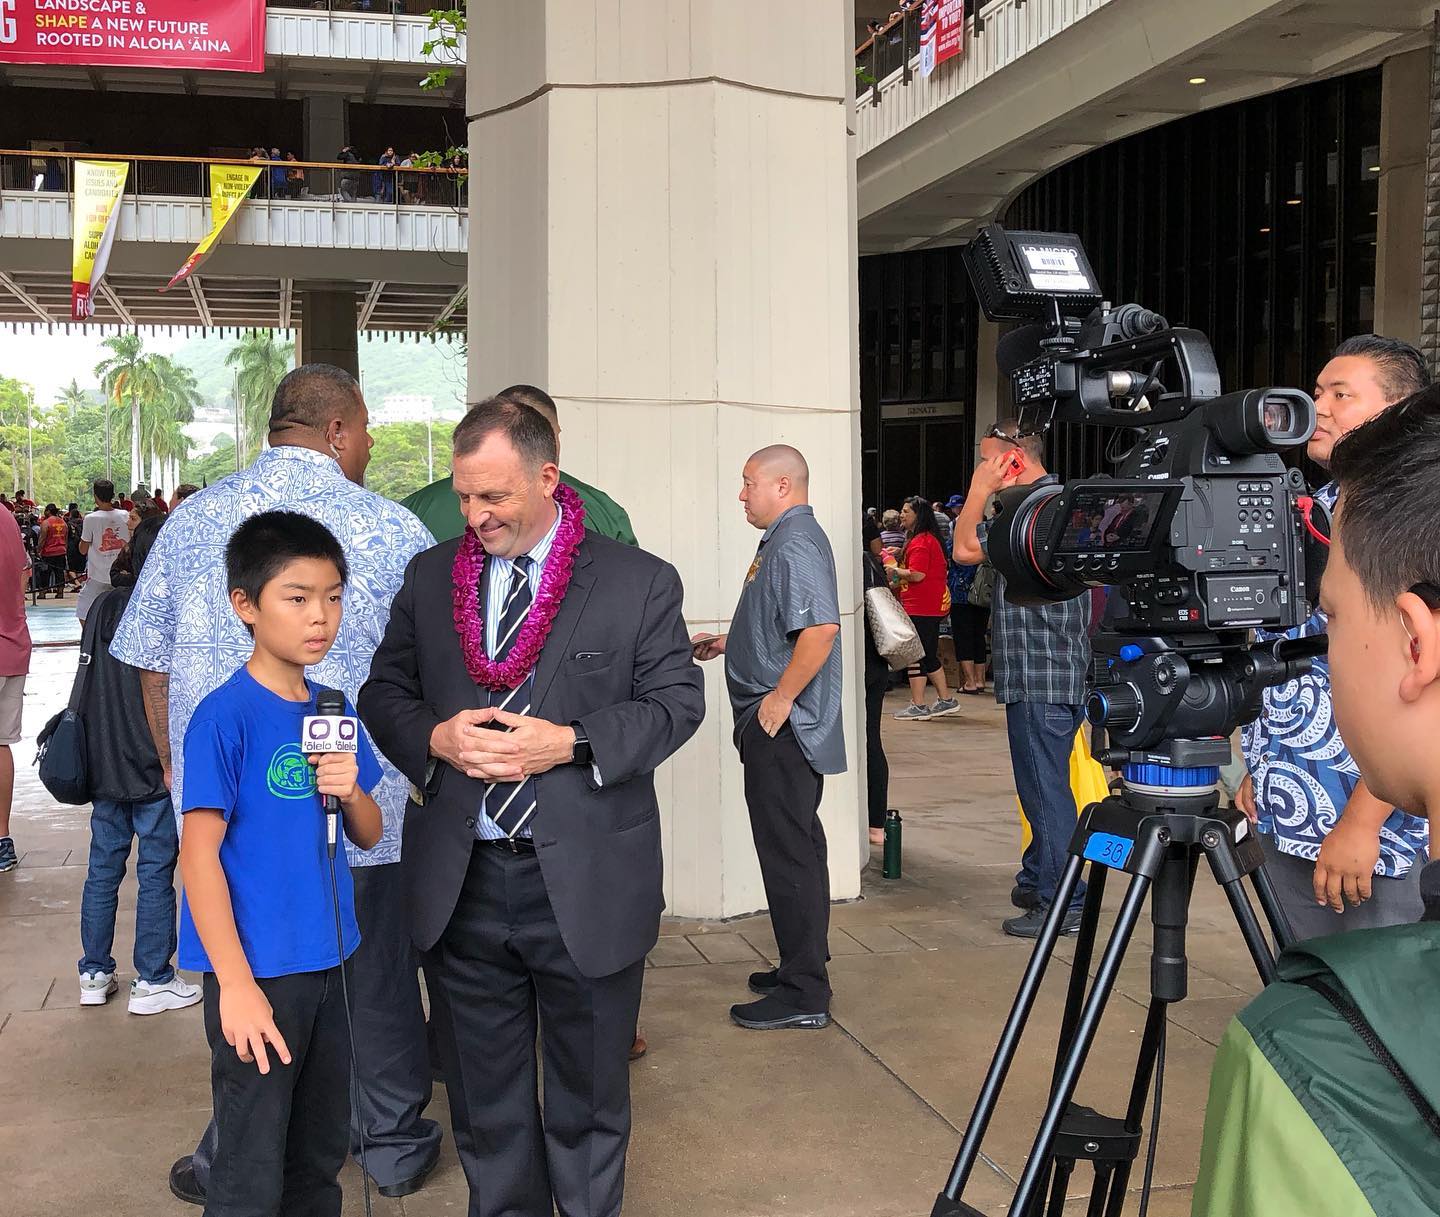 little boy being interviewed by a man from the news